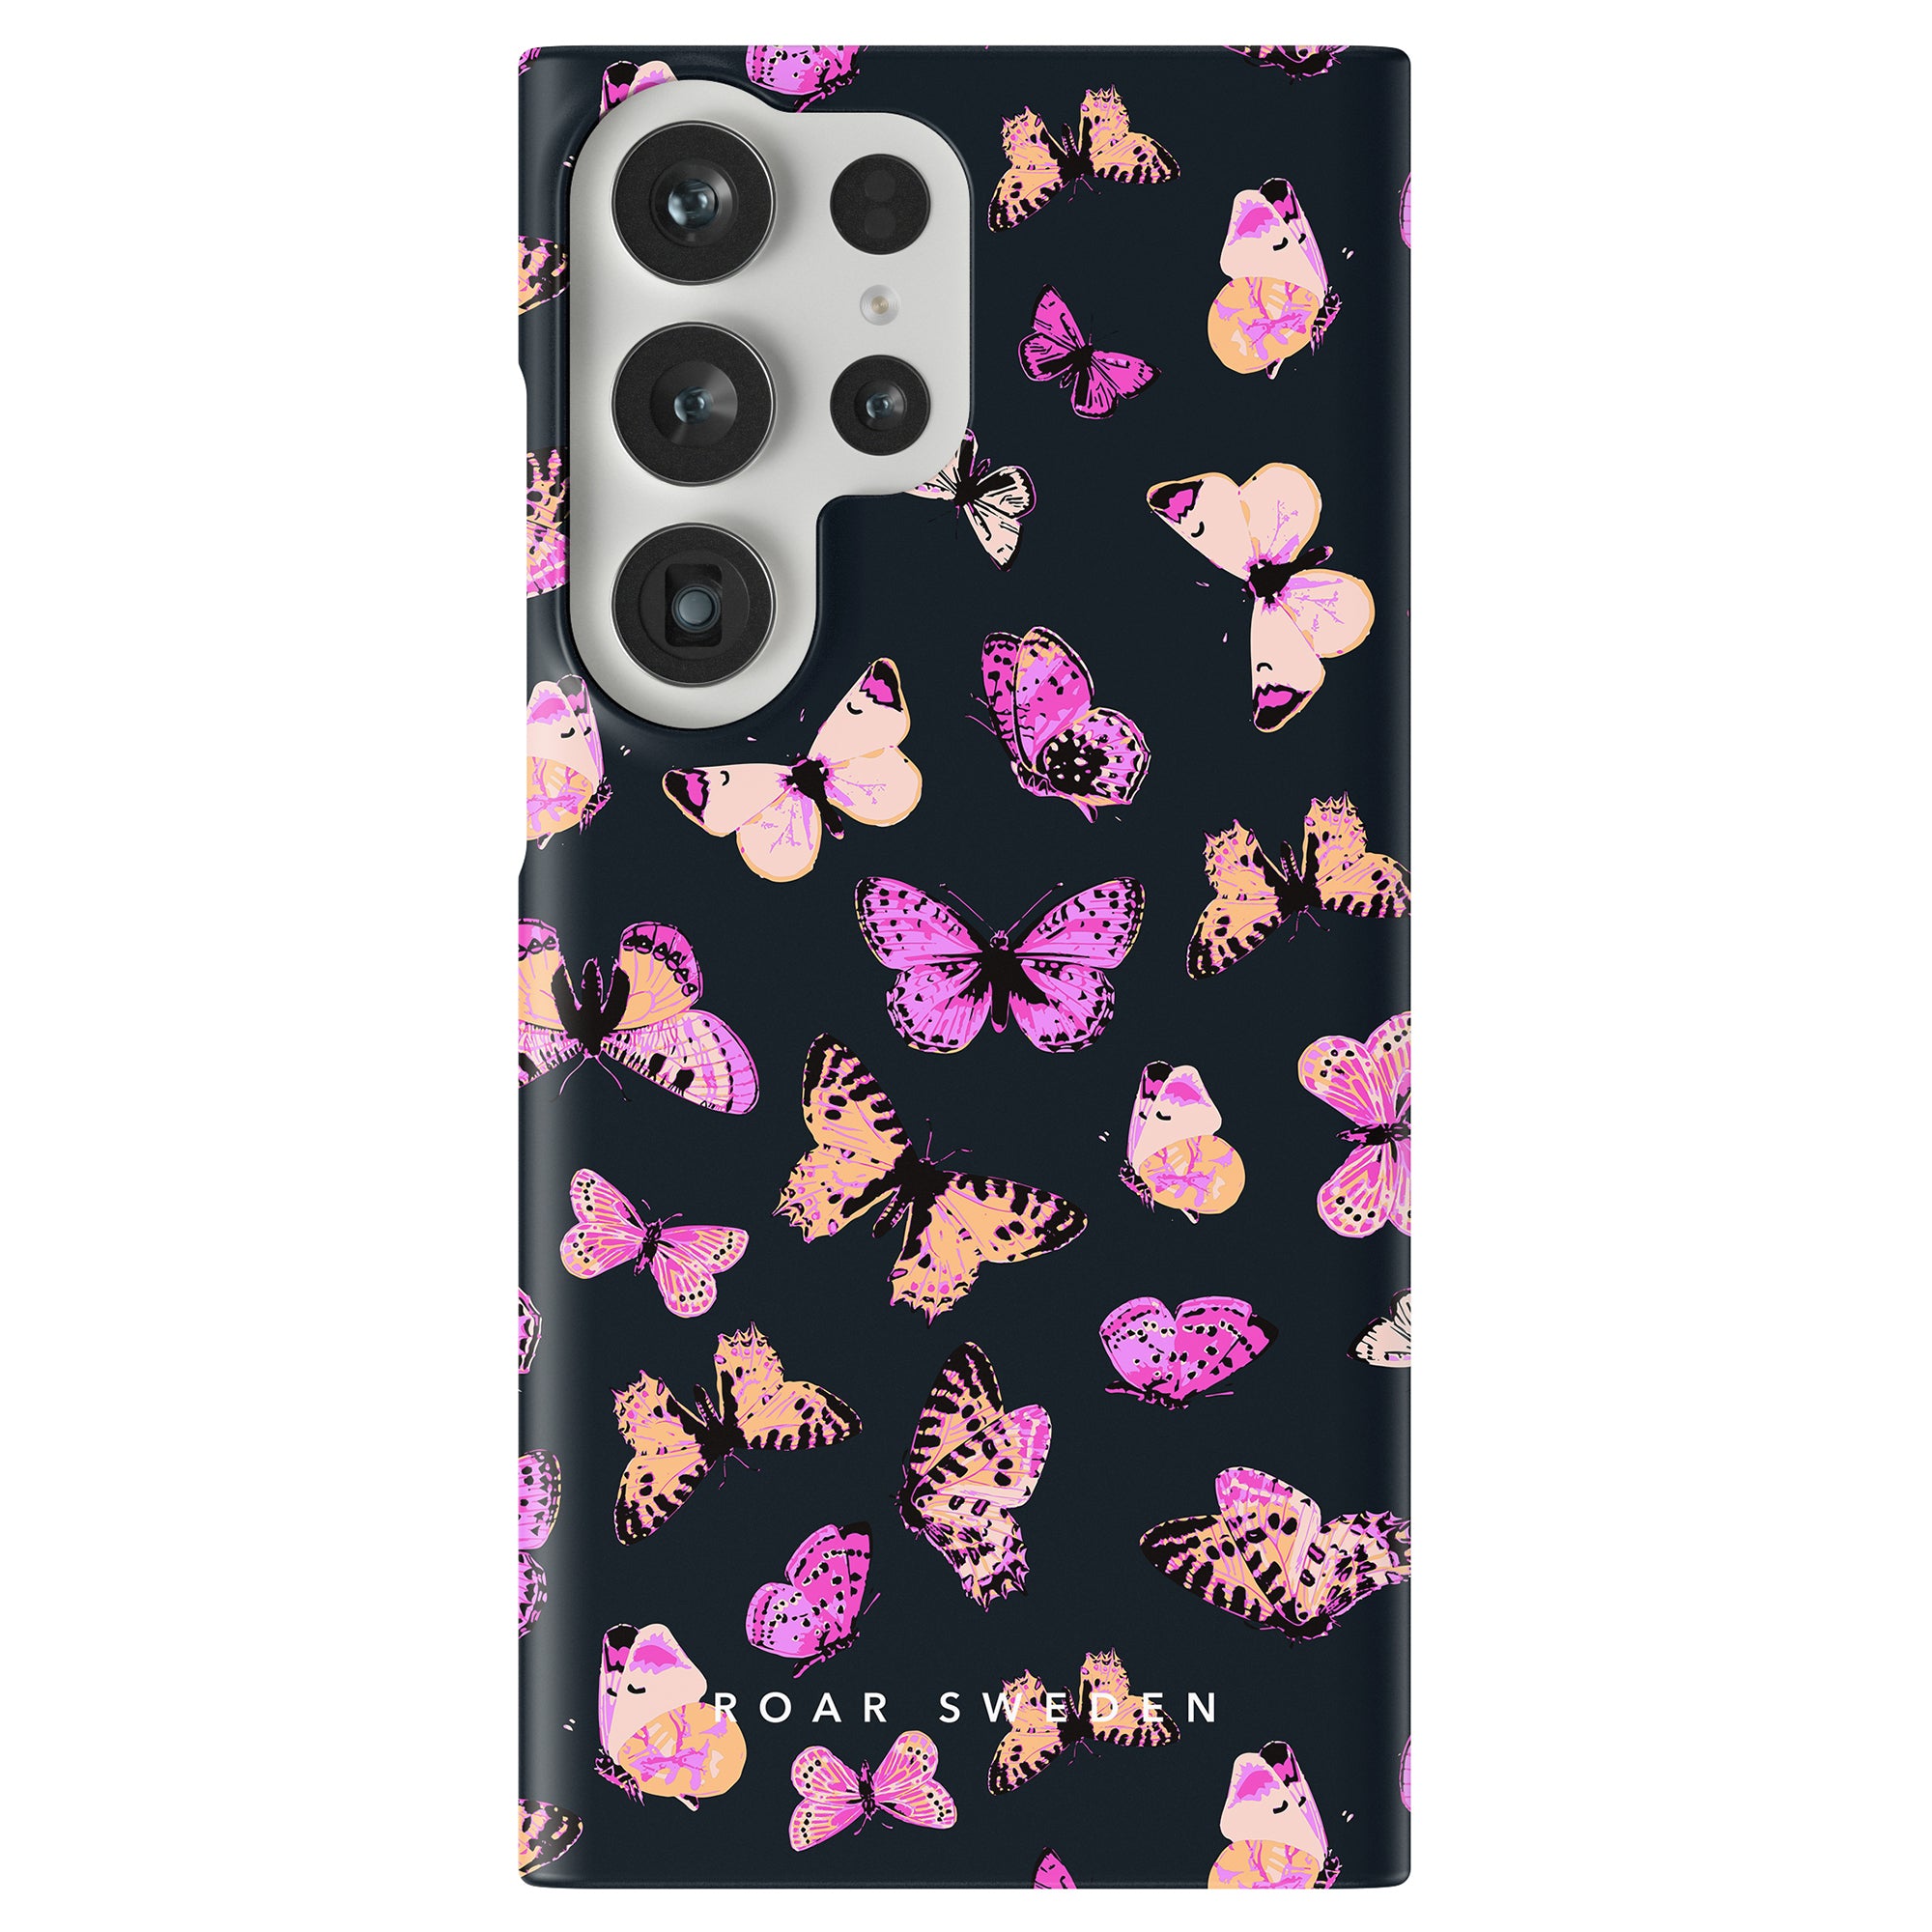 A Pink Butterflies - Slim case with butterflies on it and short sleeves.